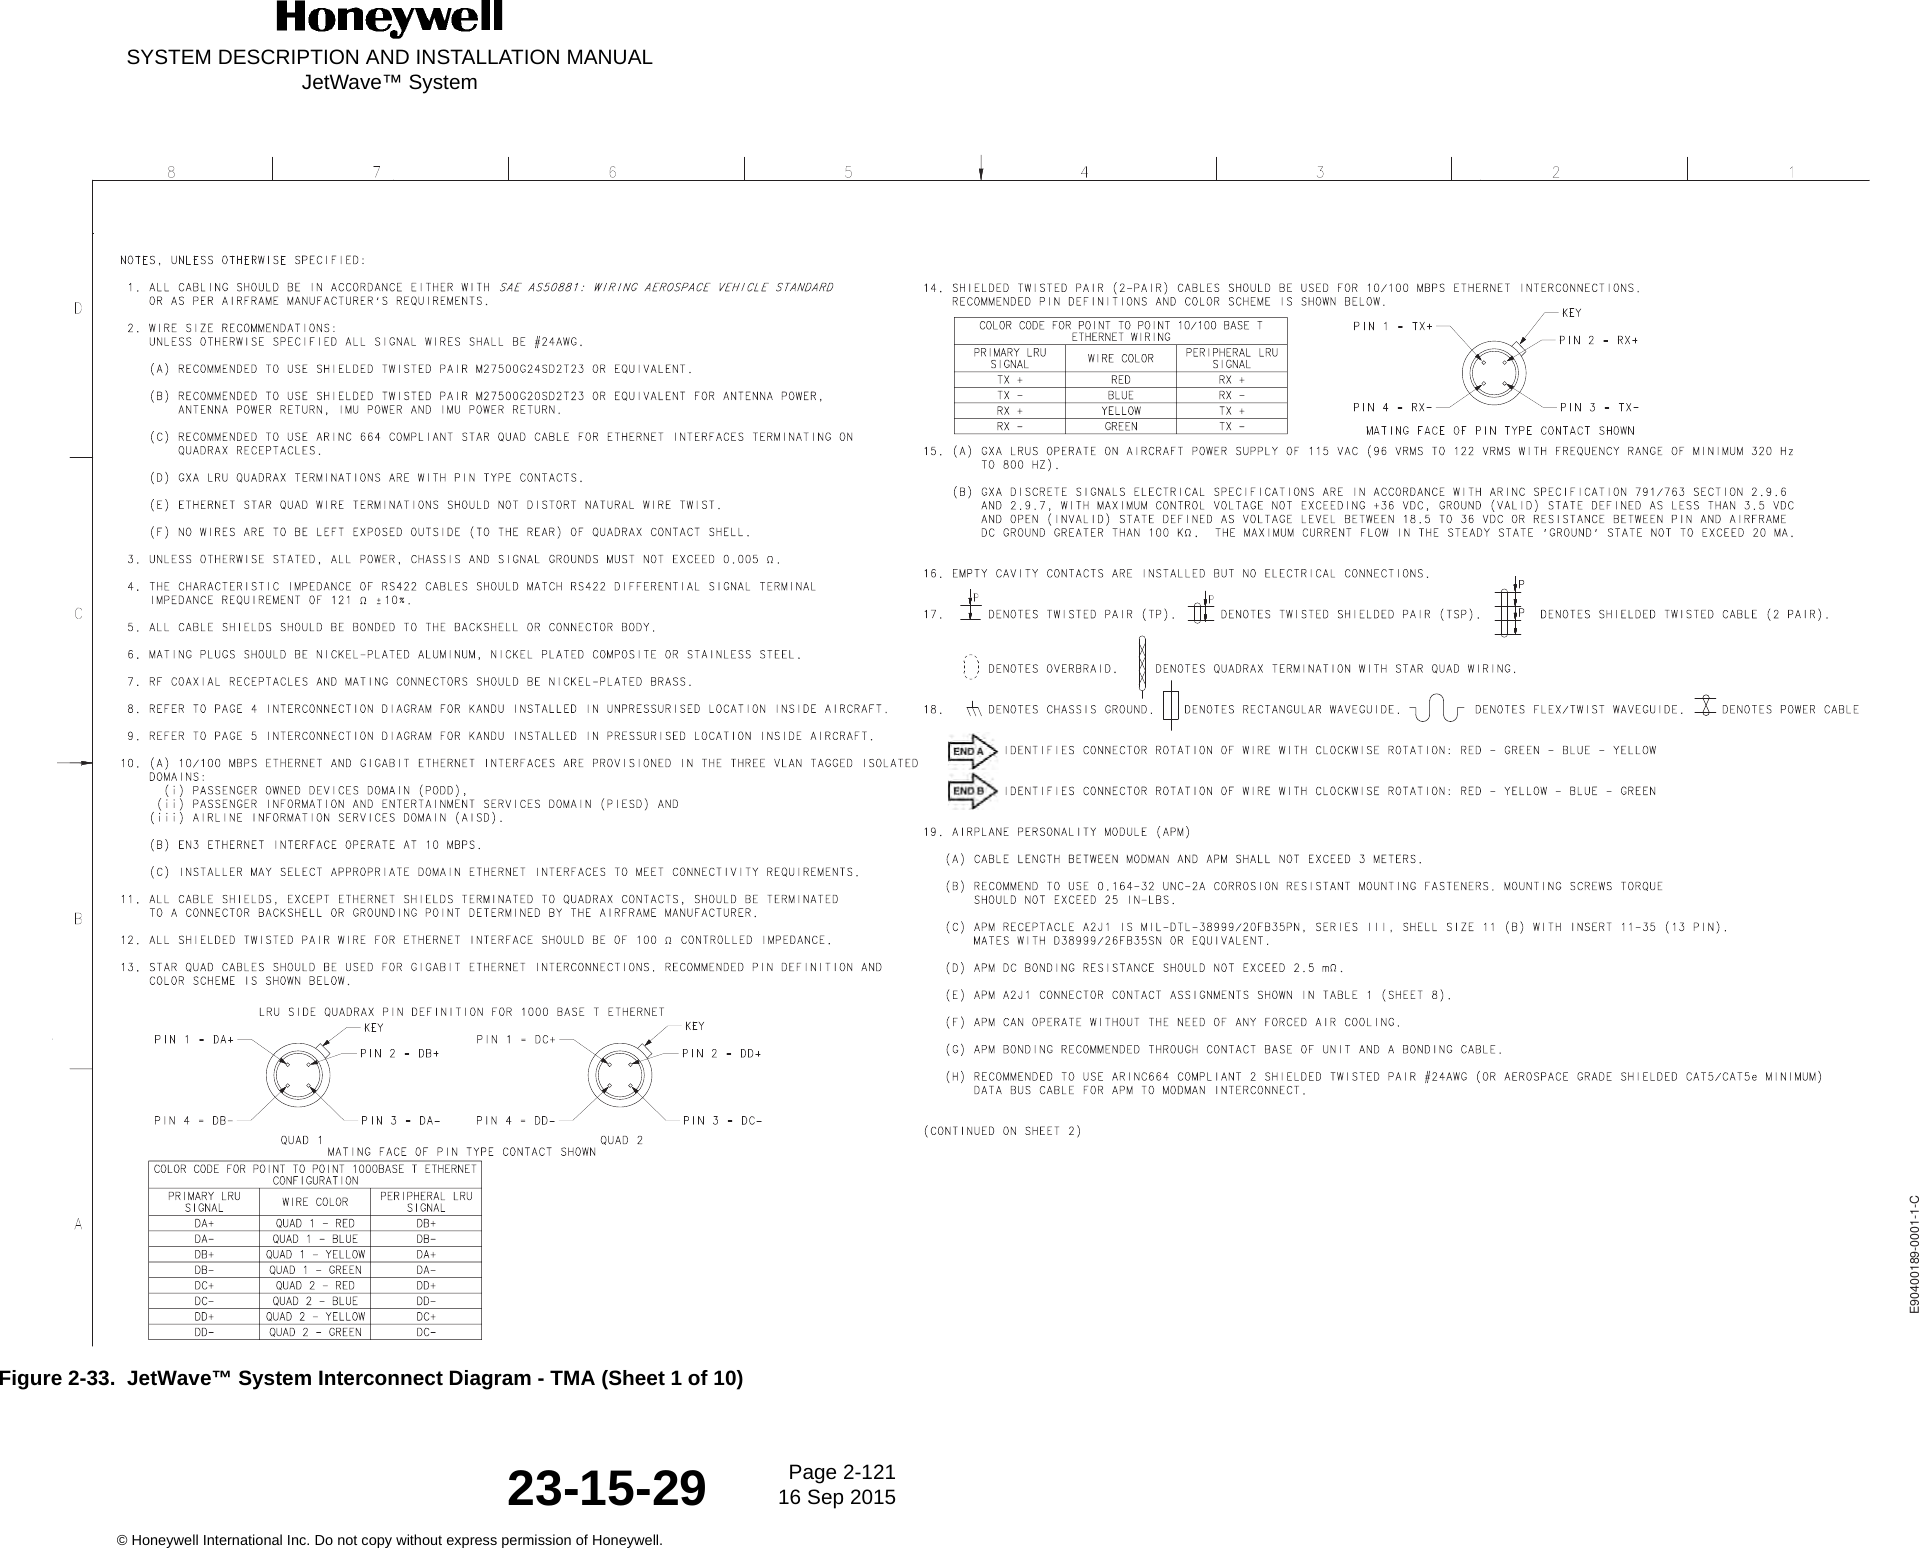 SYSTEM DESCRIPTION AND INSTALLATION MANUALJetWave™ SystemPage 2-121 16 Sep 2015© Honeywell International Inc. Do not copy without express permission of Honeywell.23-15-29  Figure 2-33.  JetWave™ System Interconnect Diagram - TMA (Sheet 1 of 10)DEVELOPMENT - Release - 24 Mar 2015 12:32:44 MST - Printed on 07 Apr 2015E90400189-0001-1-C